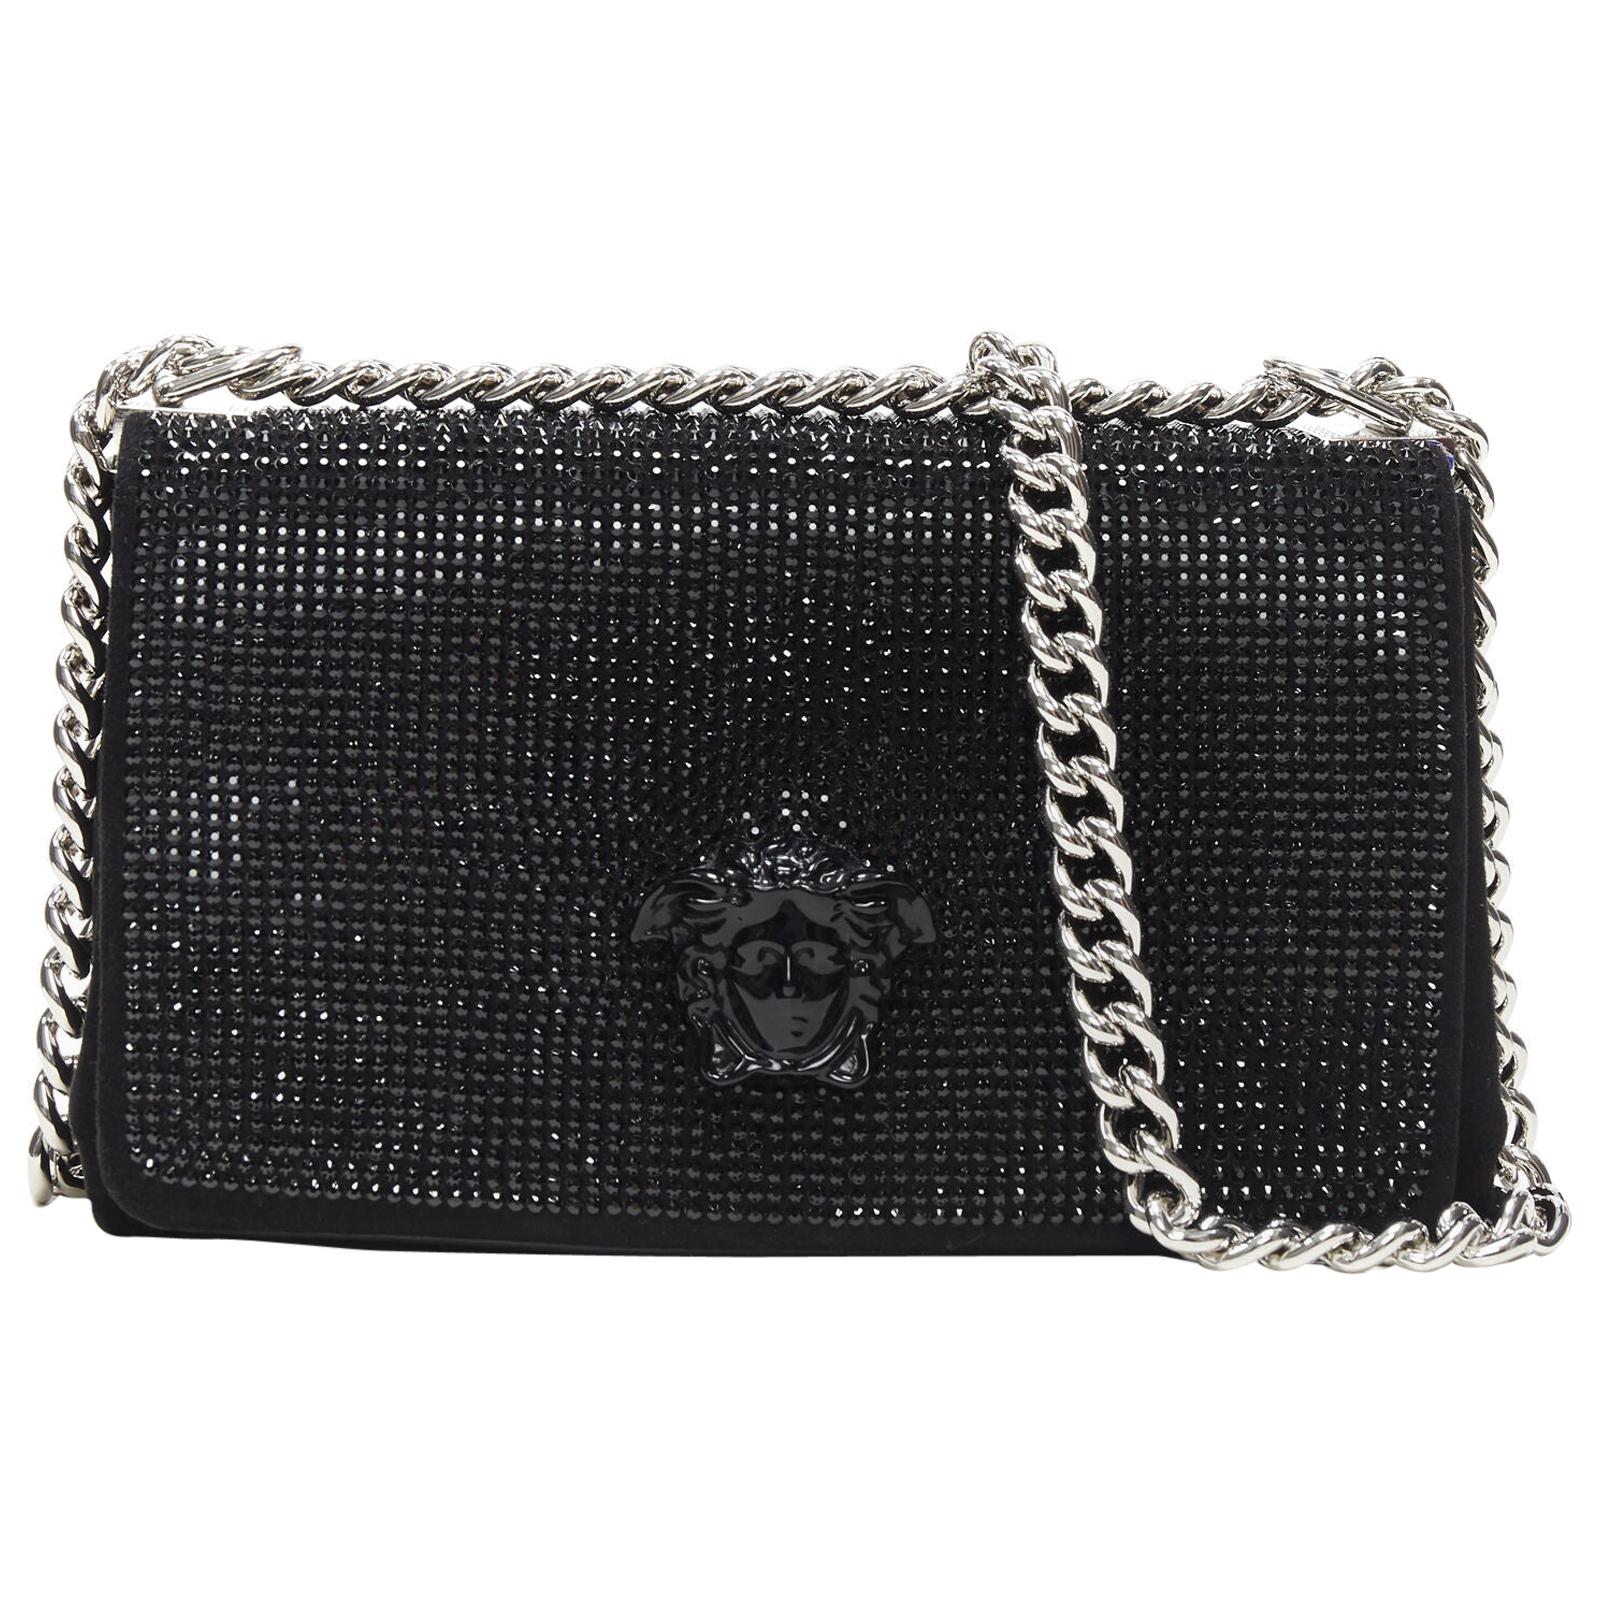 New Versace Palazzo Medusa black strass embellished flap silver chunky chain bag